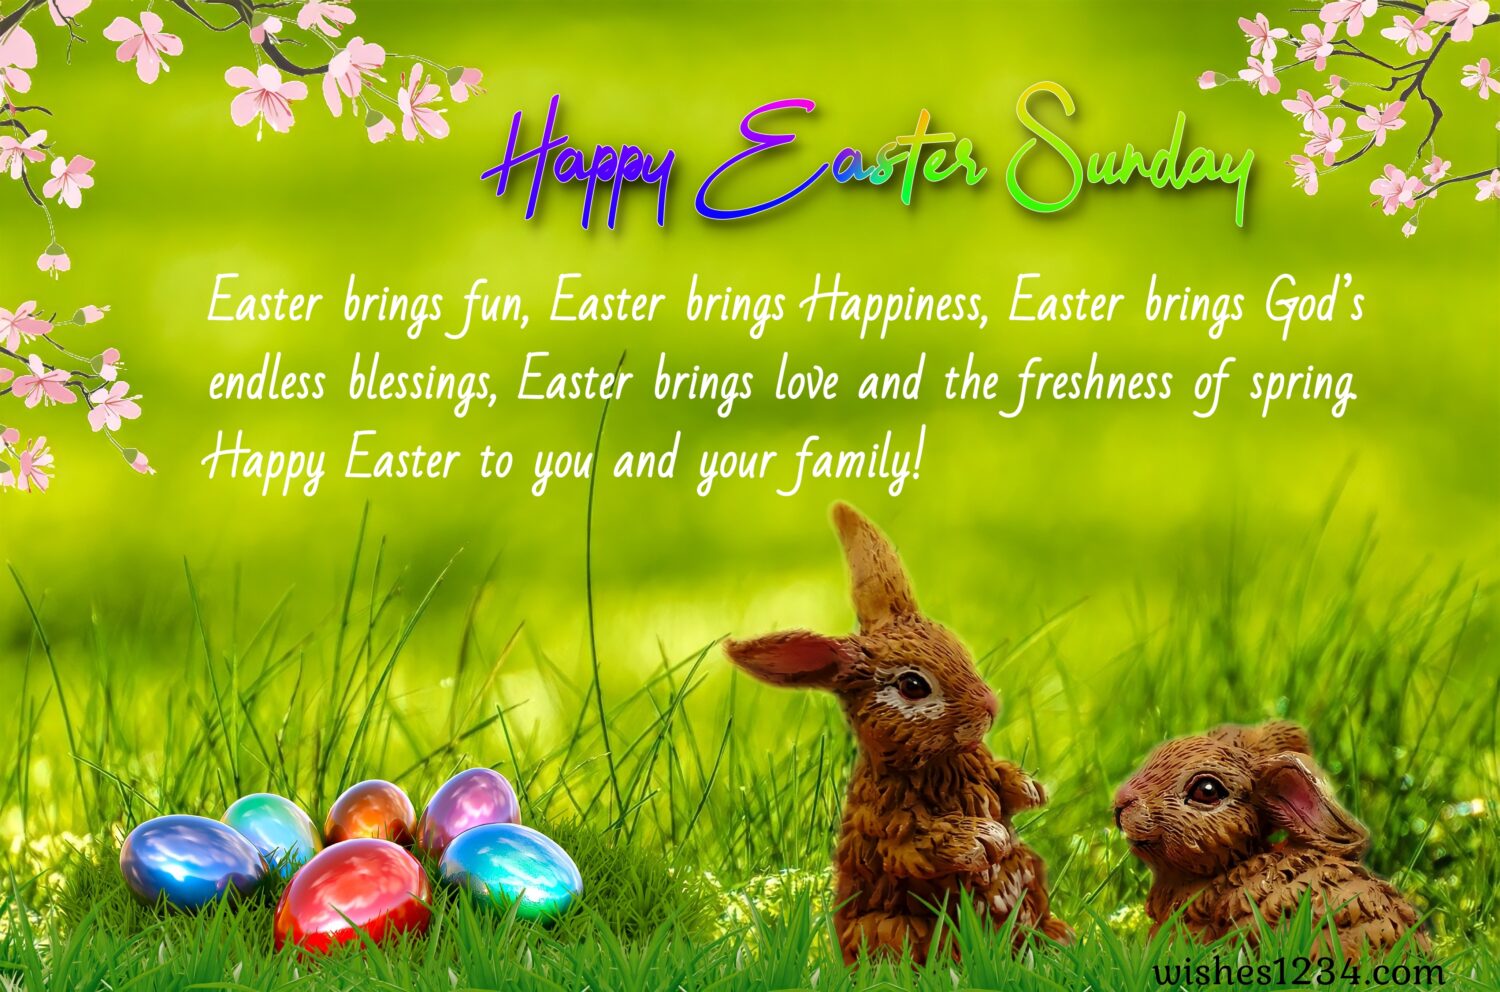 Two Easter bunnies with easter eggs, Happy Easter Wishes, Quotes & Images.